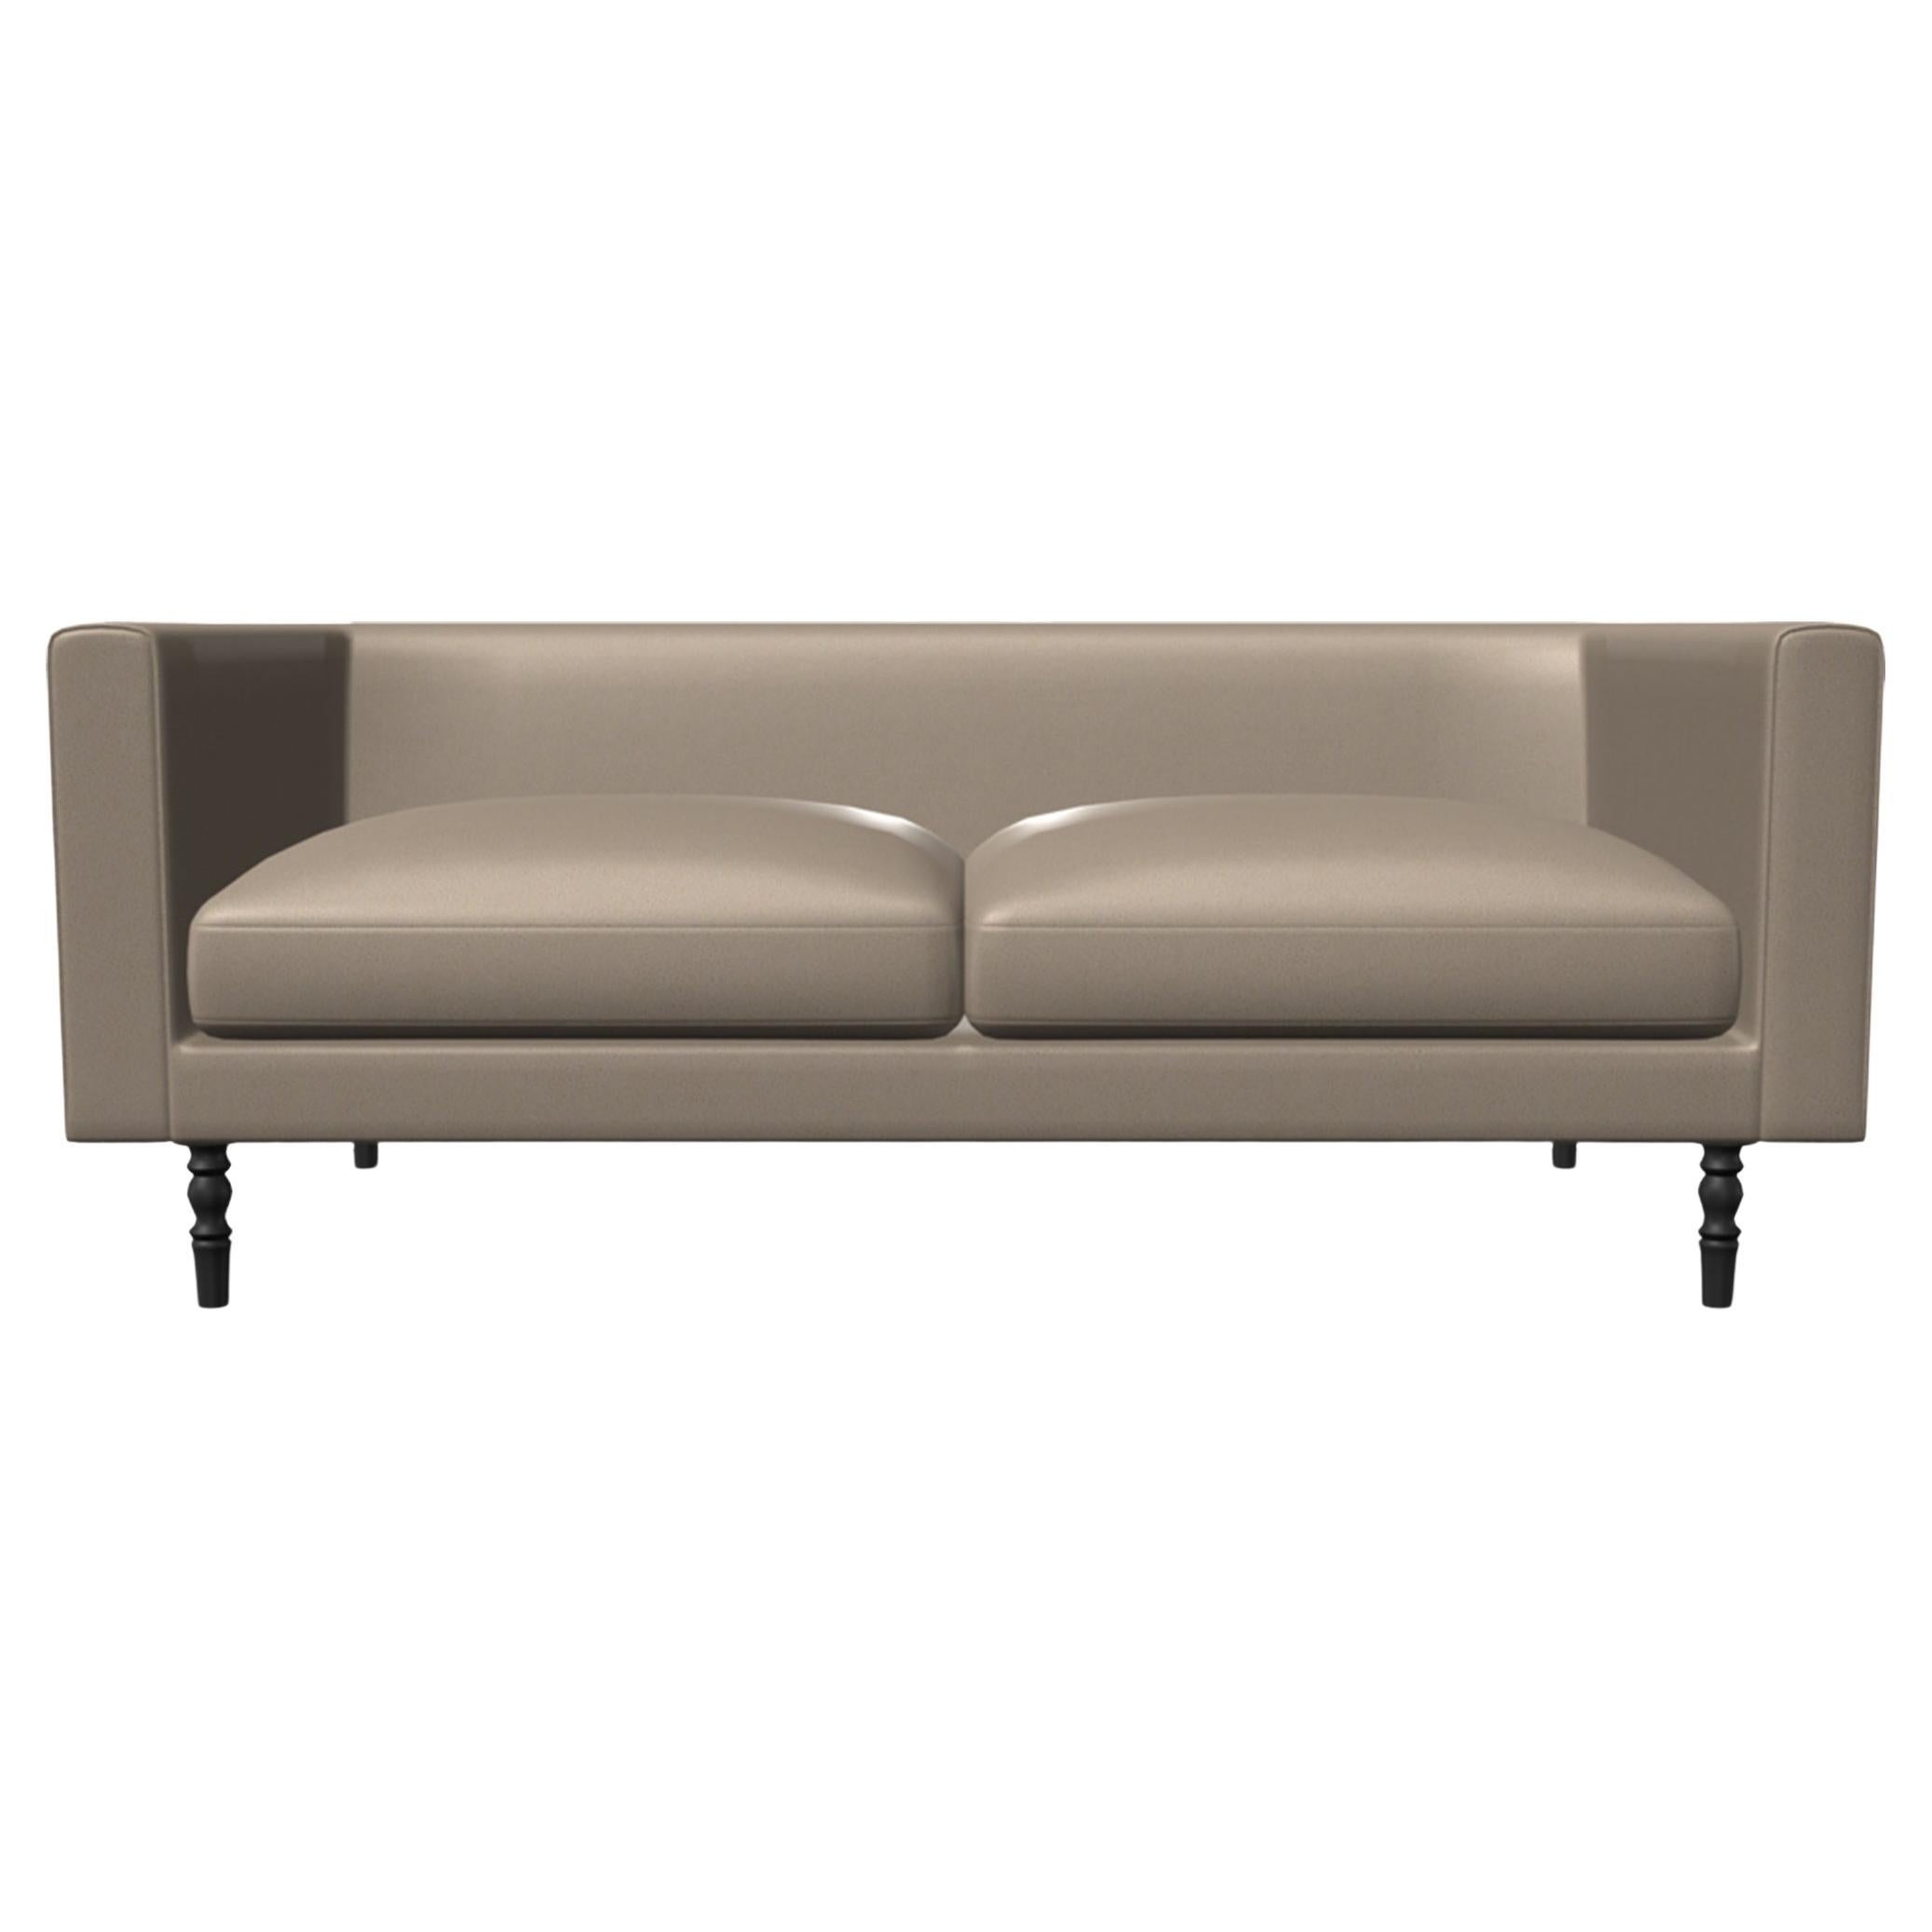 Moooi Boutique 2-Seat Sofa in Spectrum Mineral 30160 Upholstery with Pawn Legs